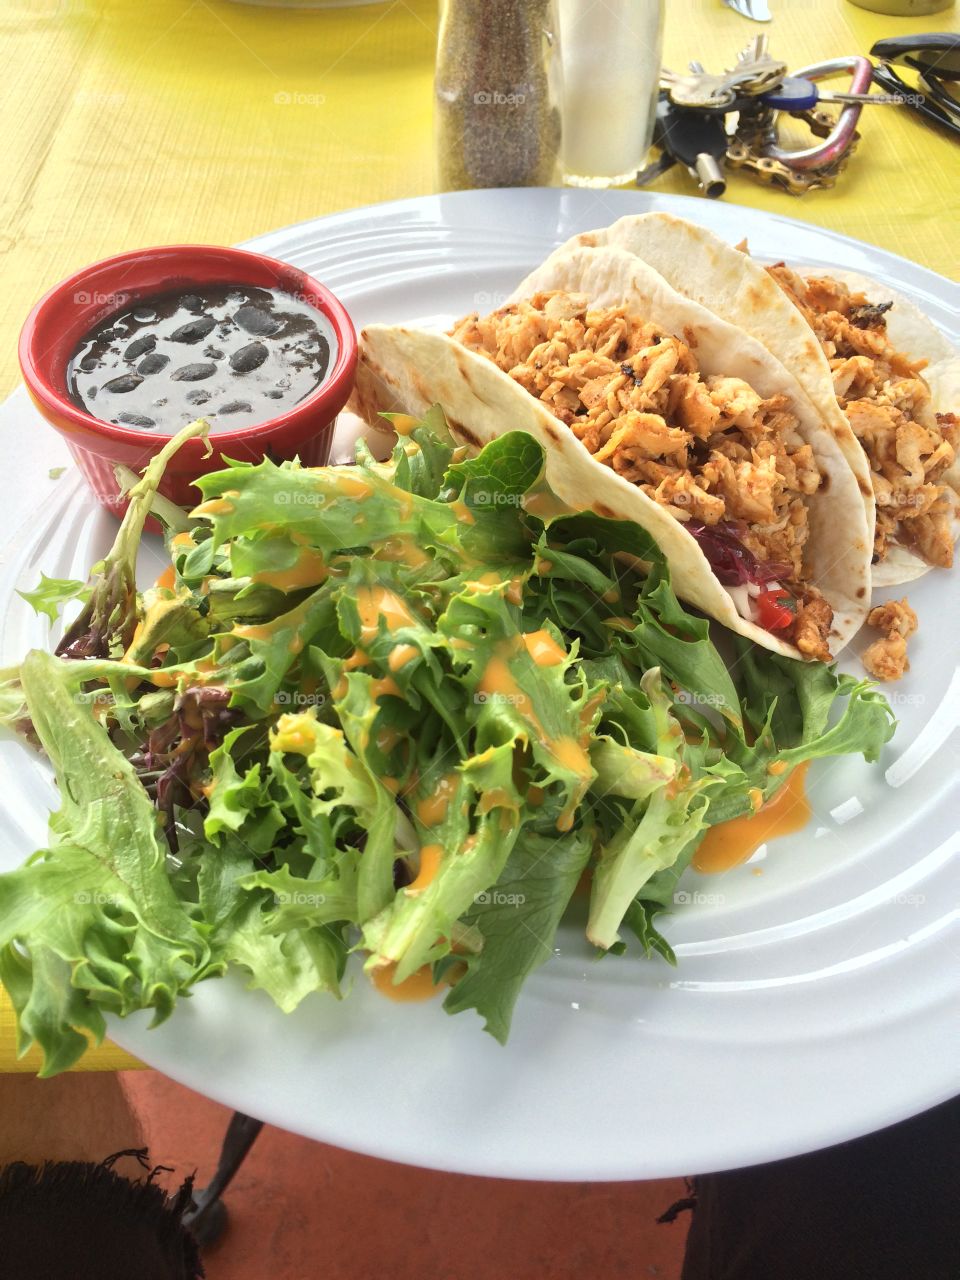 Fish tacos . Fish tacos from whiptail grill Zion 